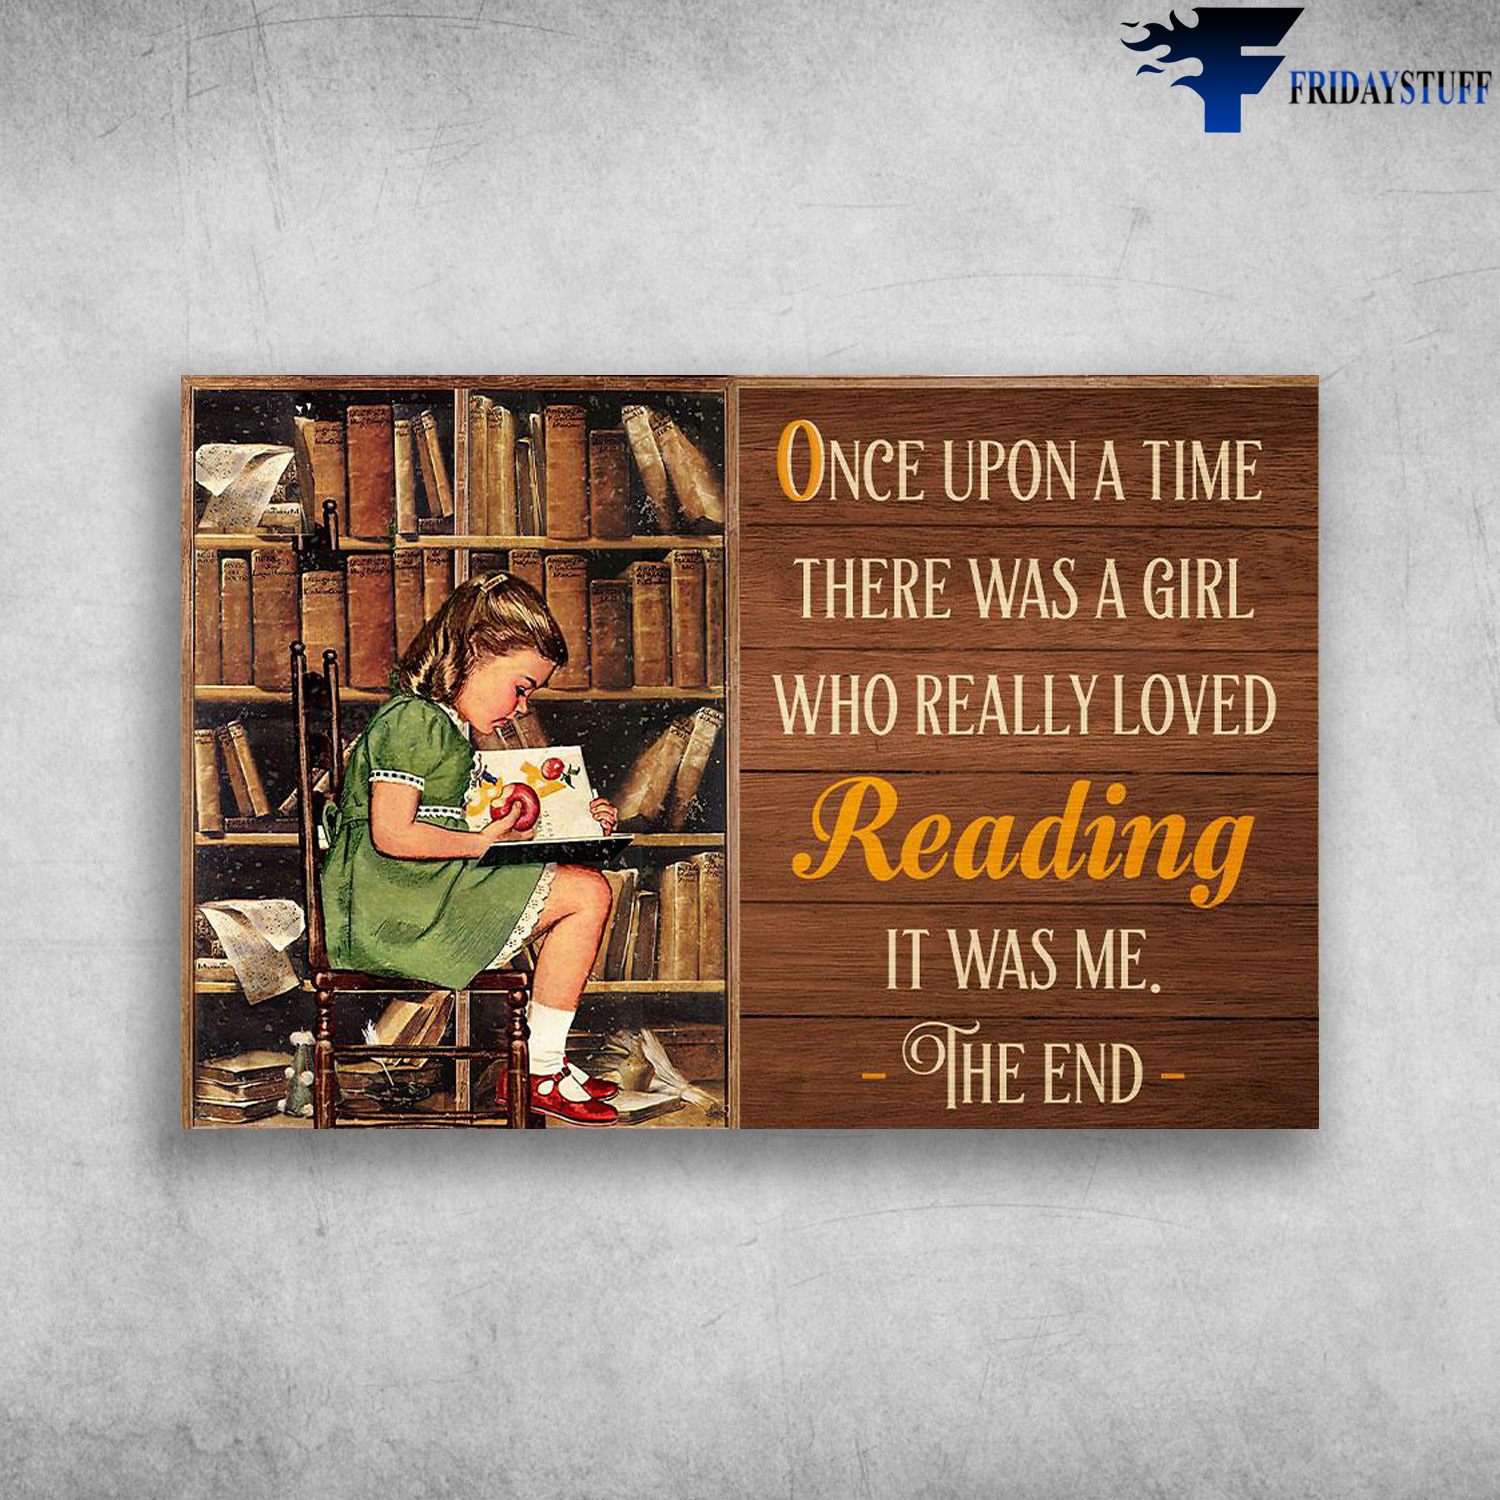 Little Girl Reading Book - Once Upon A Time, There Was A Girl, Who Really Loved Reading, Is Was Me, The End